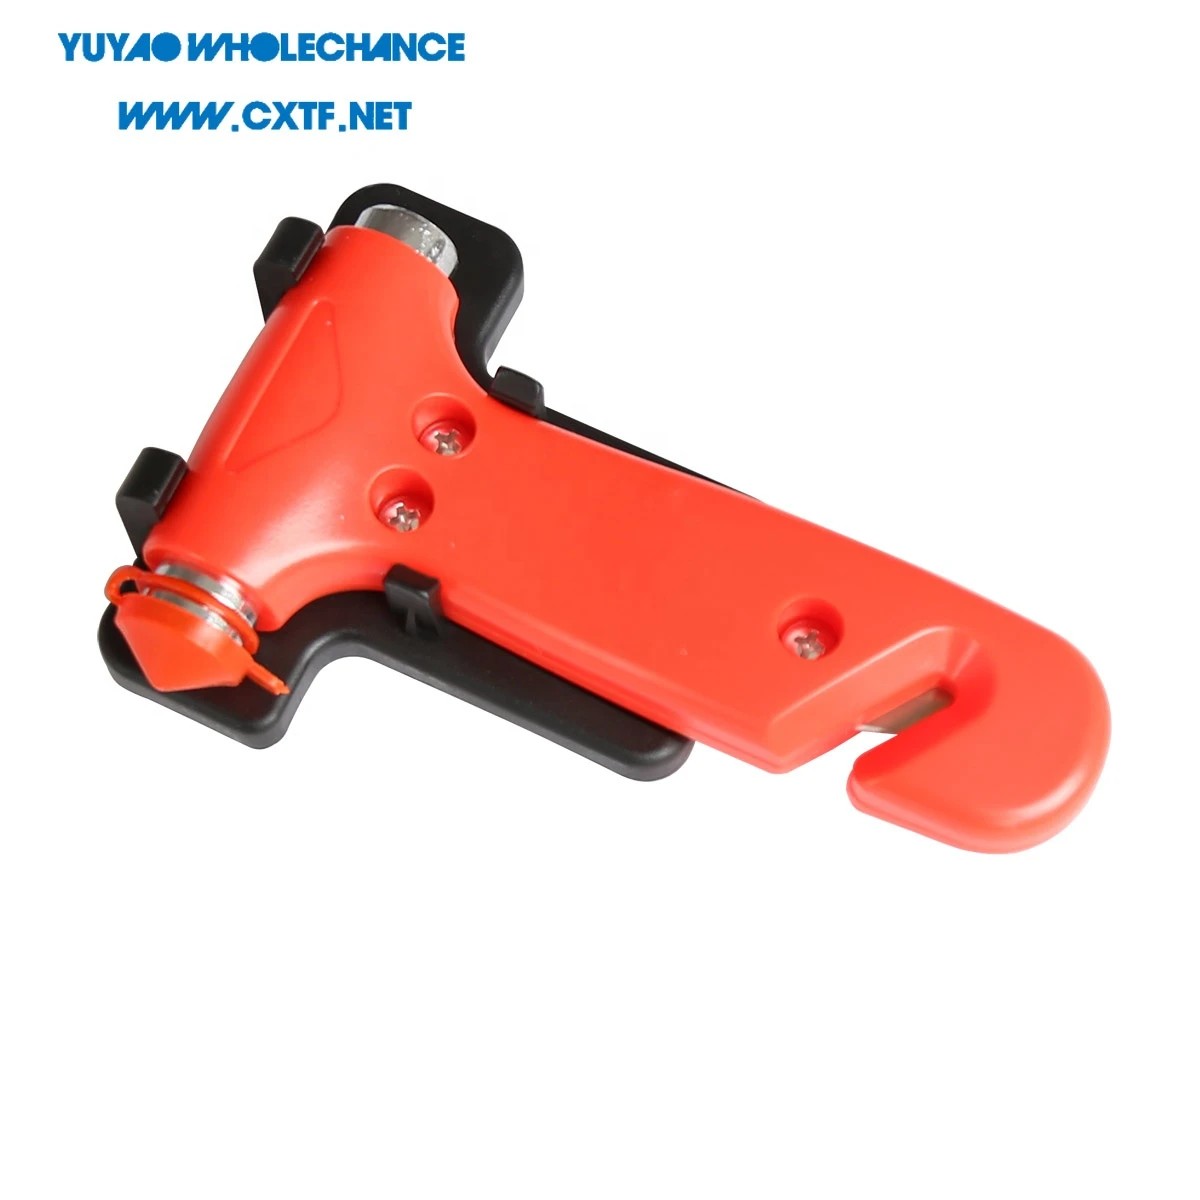 Competitive price with high quality car escape tool emergency survival kit safety hammer